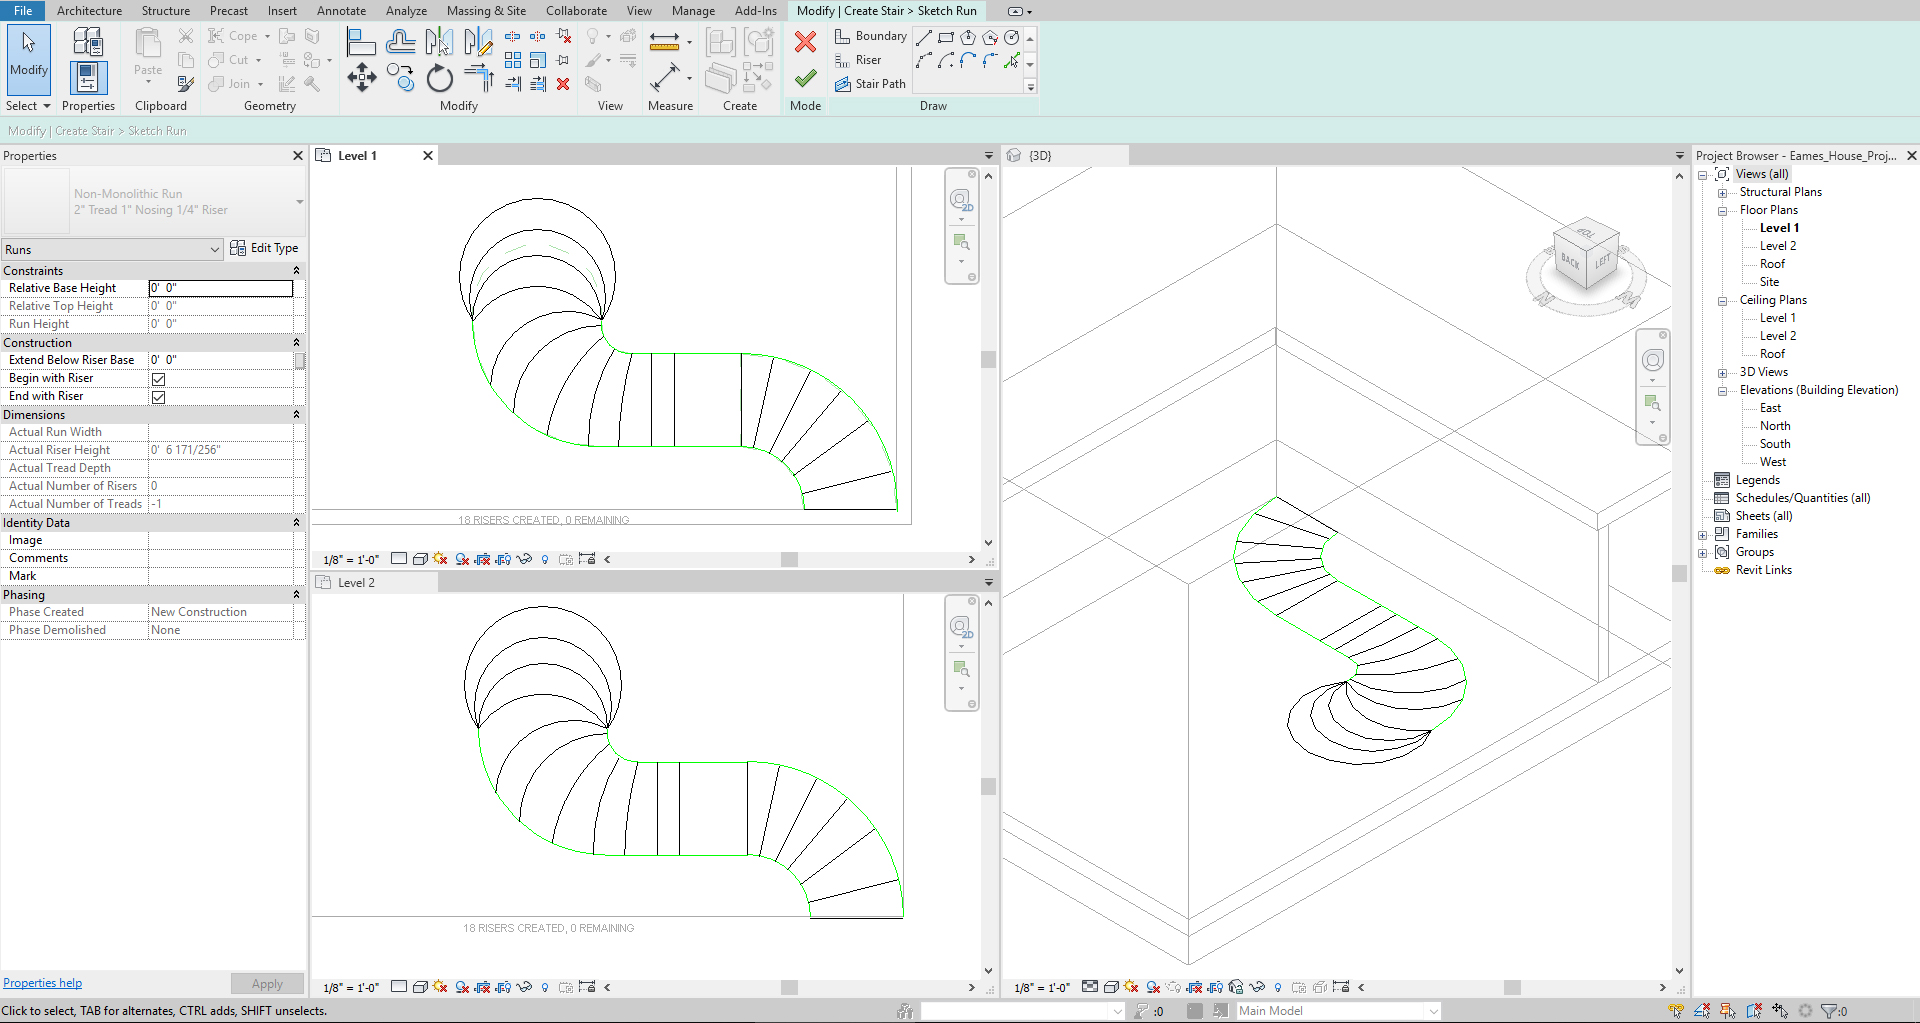 This image shows the sketches for the custom stair.